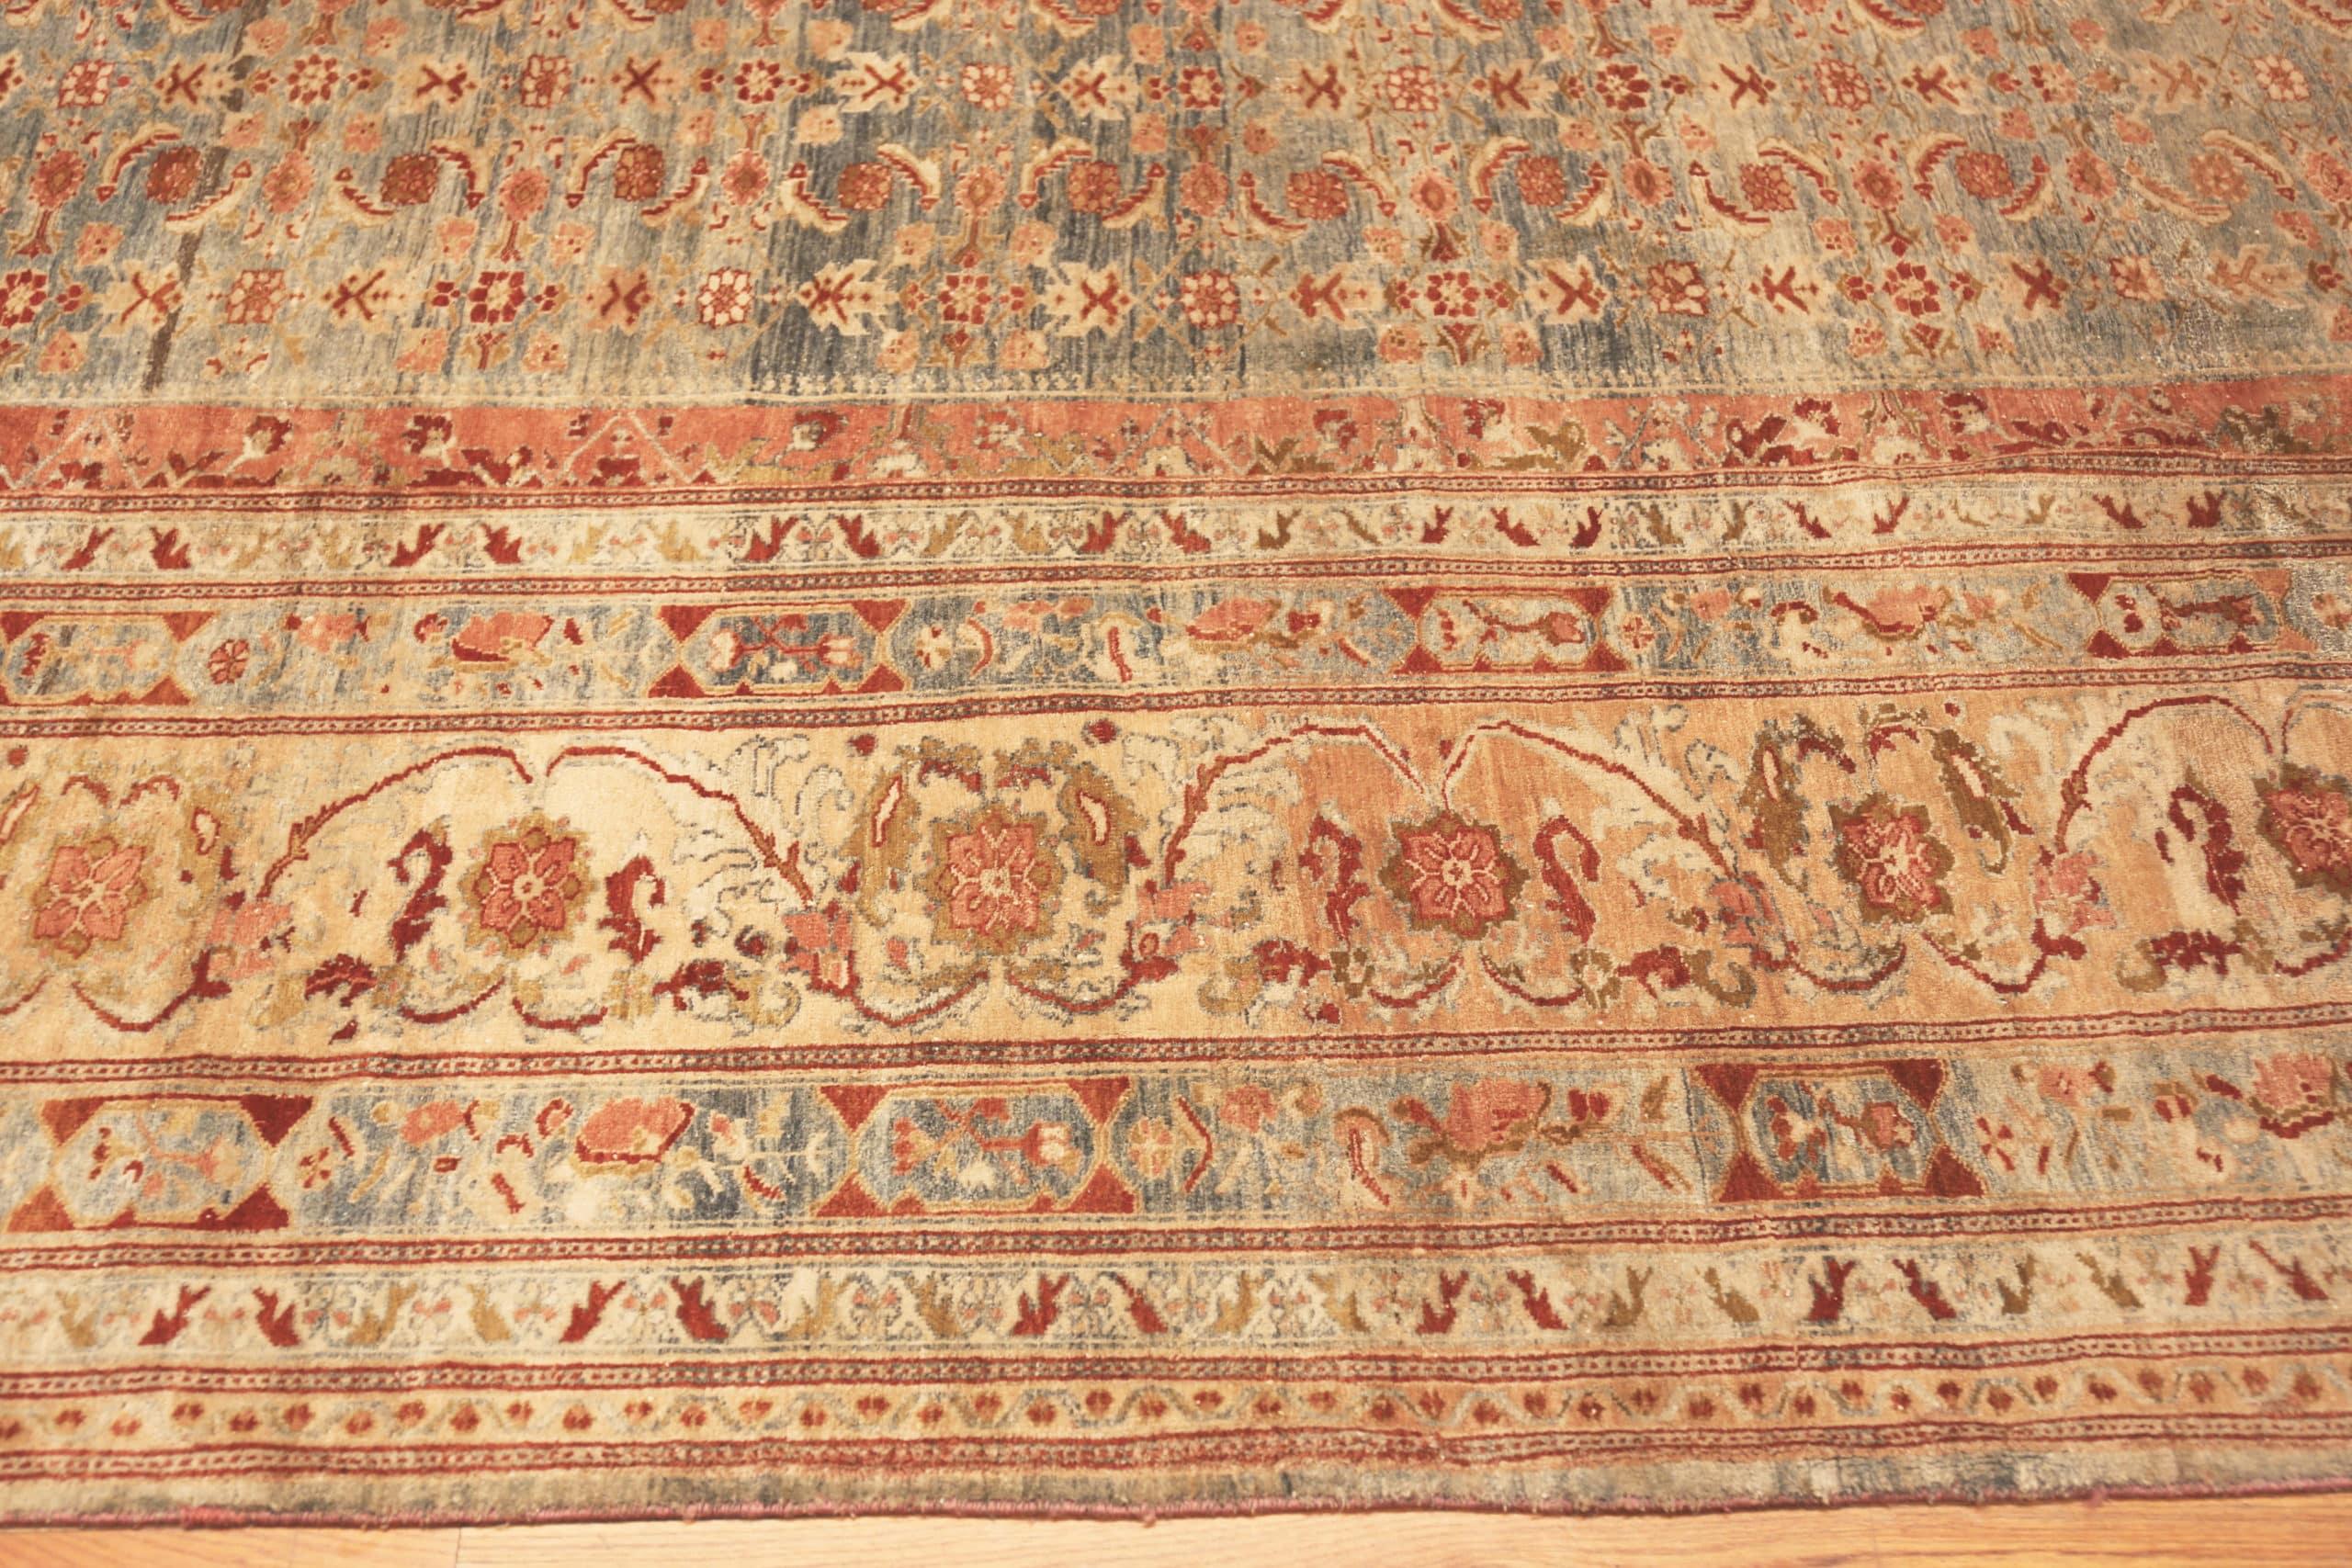 Large Light Blue Background Antique Persian Malayer Rug, Country of Origin / rug type: Persian rug, Circa date: 1920. Size: 12 ft 4 in x 18 ft 8 in (3.75 m x 5.68 m). 